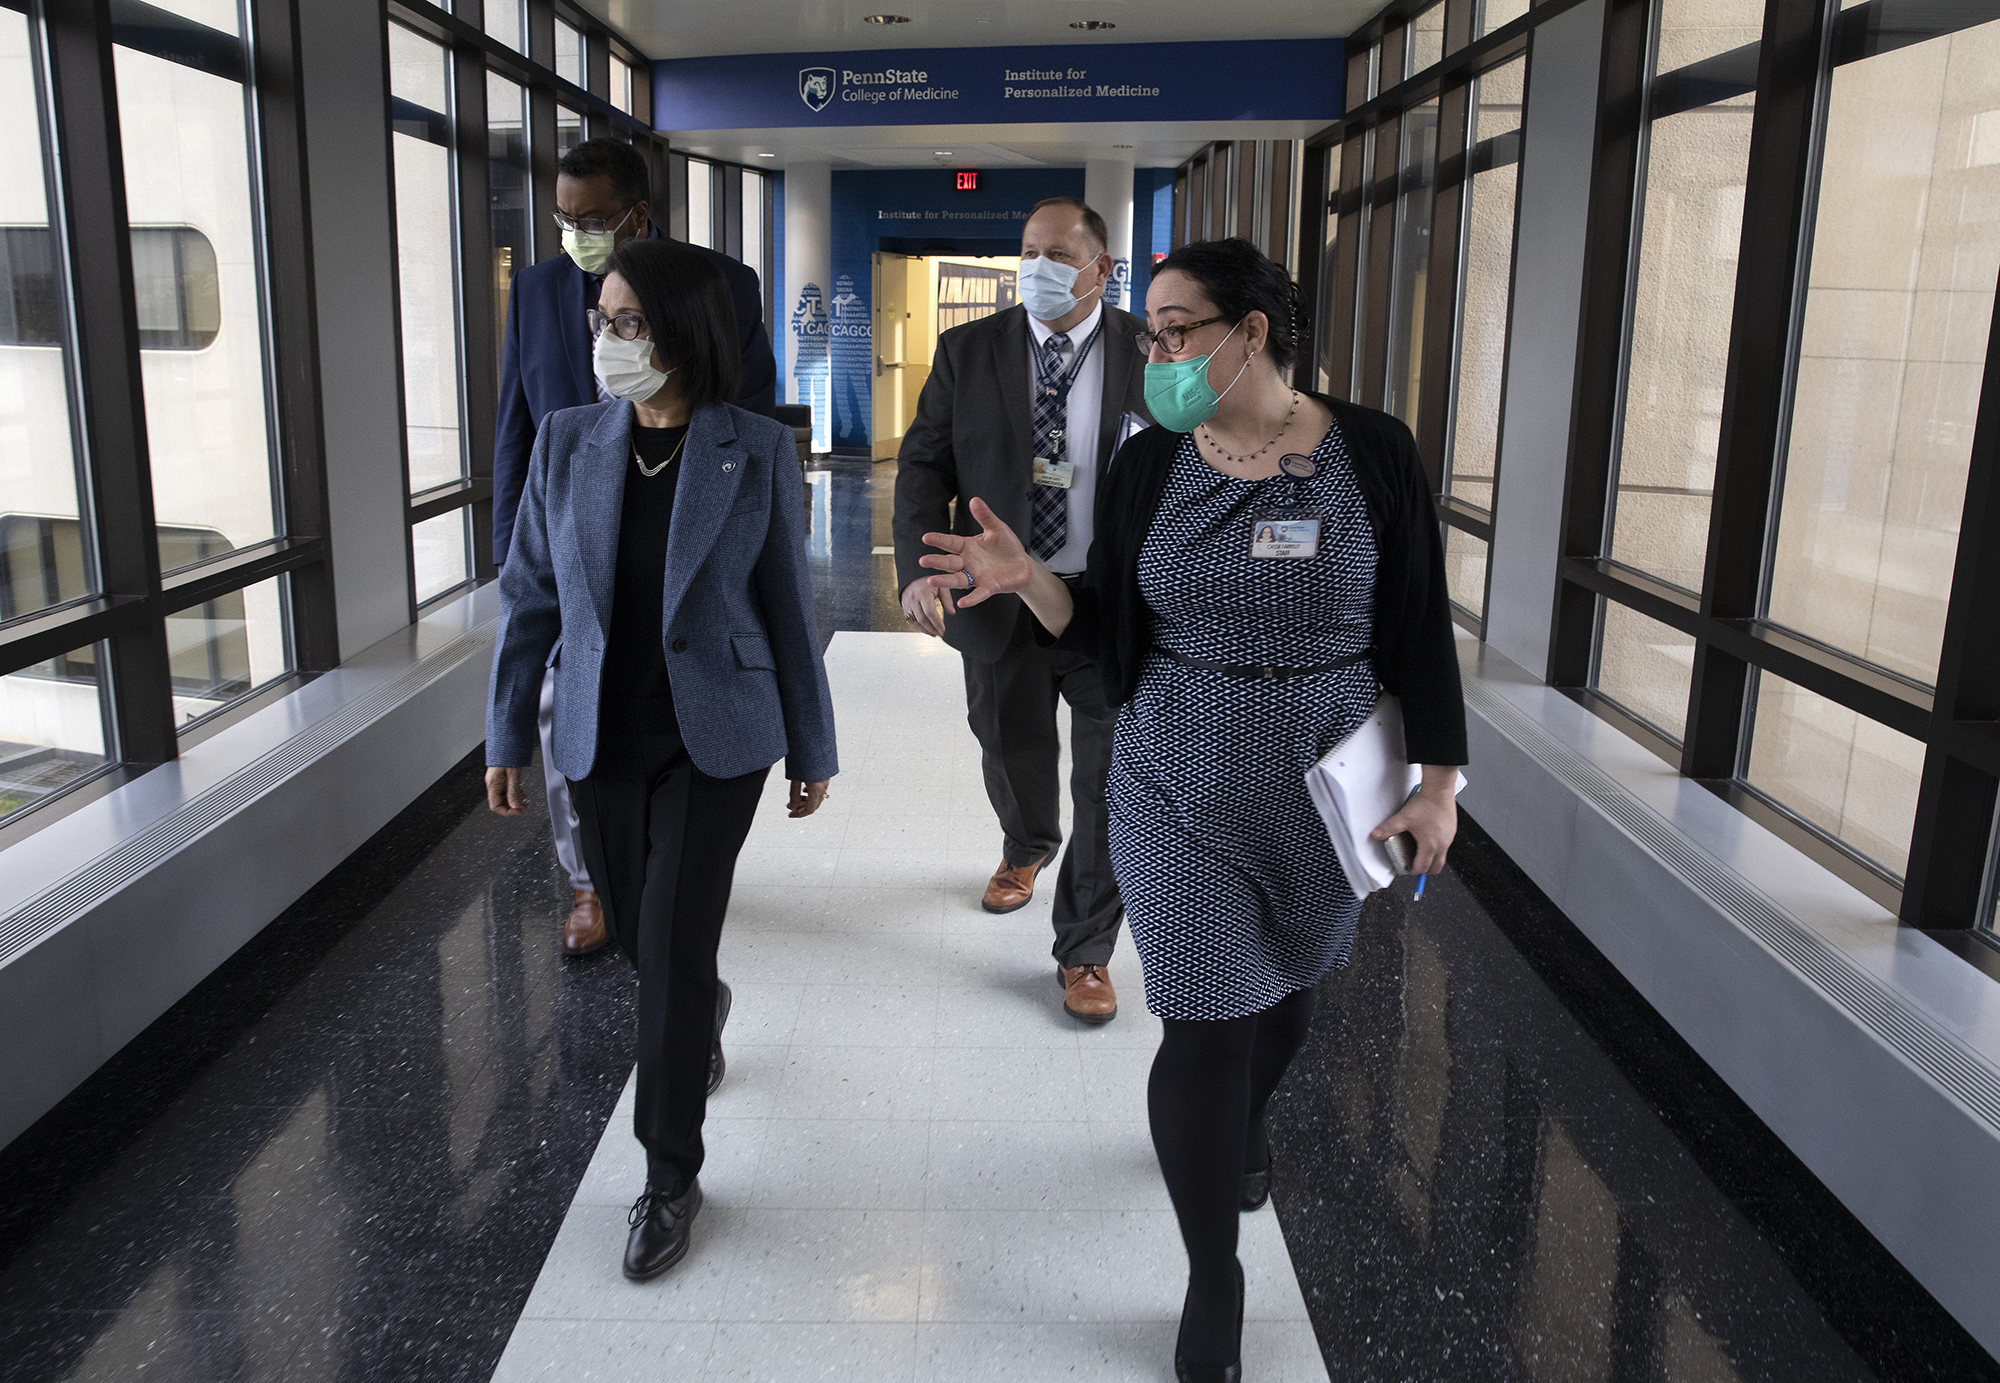 Neeli Bendapudi walks down a hallway with a woman and two men at the Penn State Health Milton S. Hershey Medical Center.